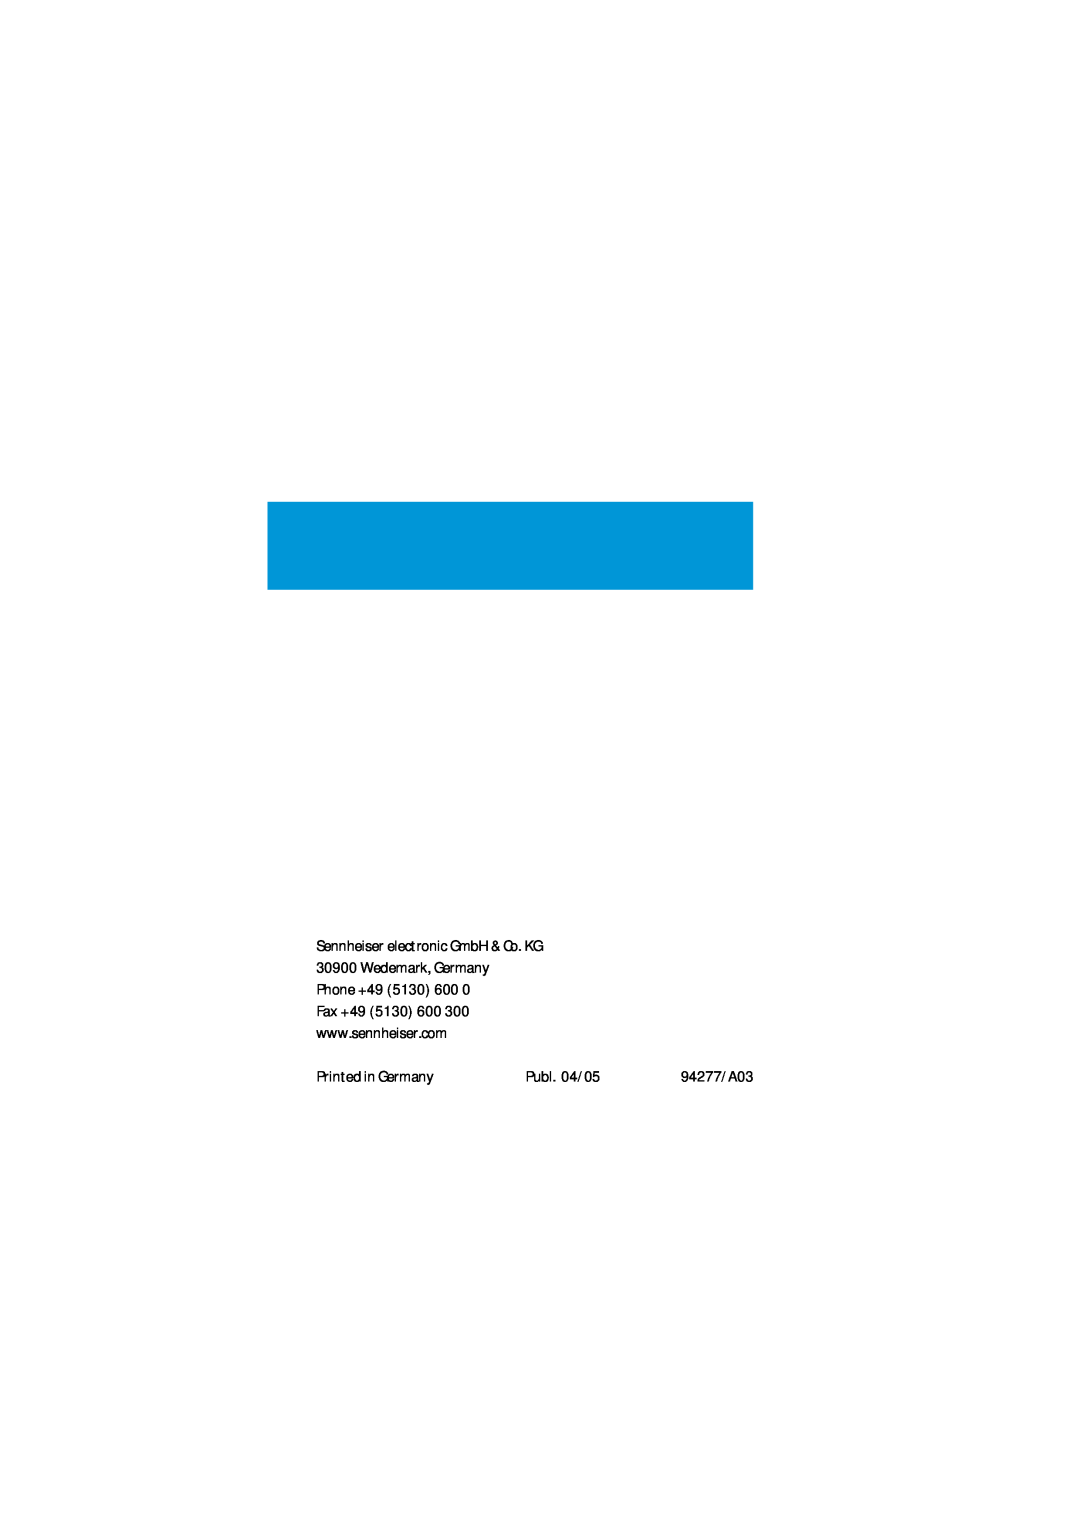 Sennheiser E 906 manual Fax +49 5130 600, Printed in Germany, Publ. 04/05, 94277/A03 